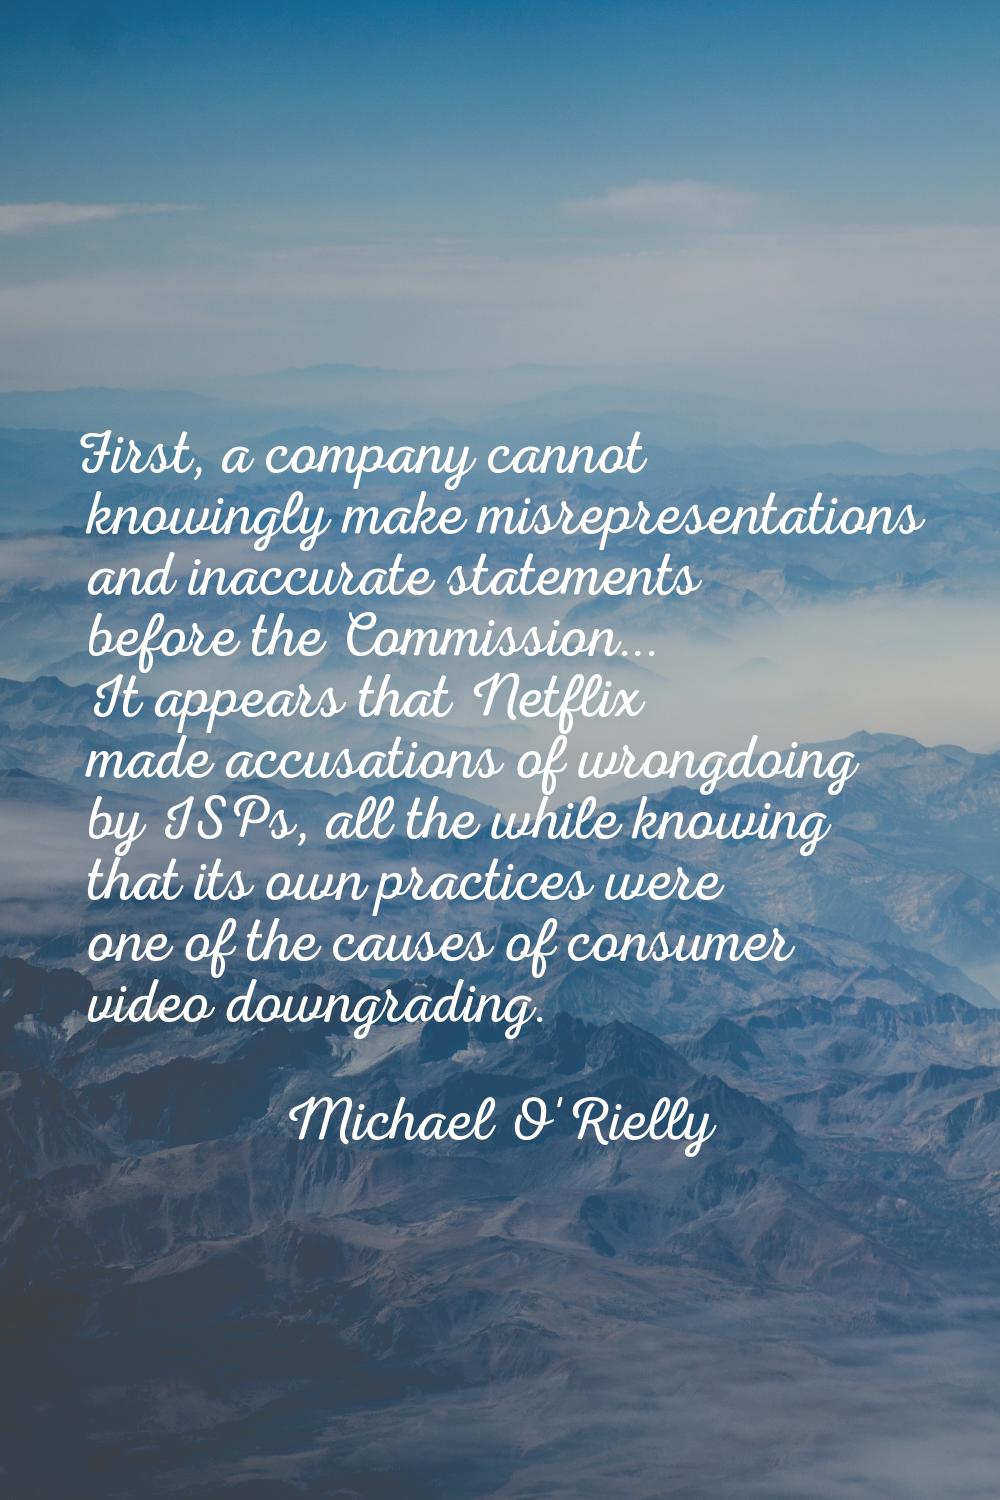 First, a company cannot knowingly make misrepresentations and inaccurate statements before the Comm